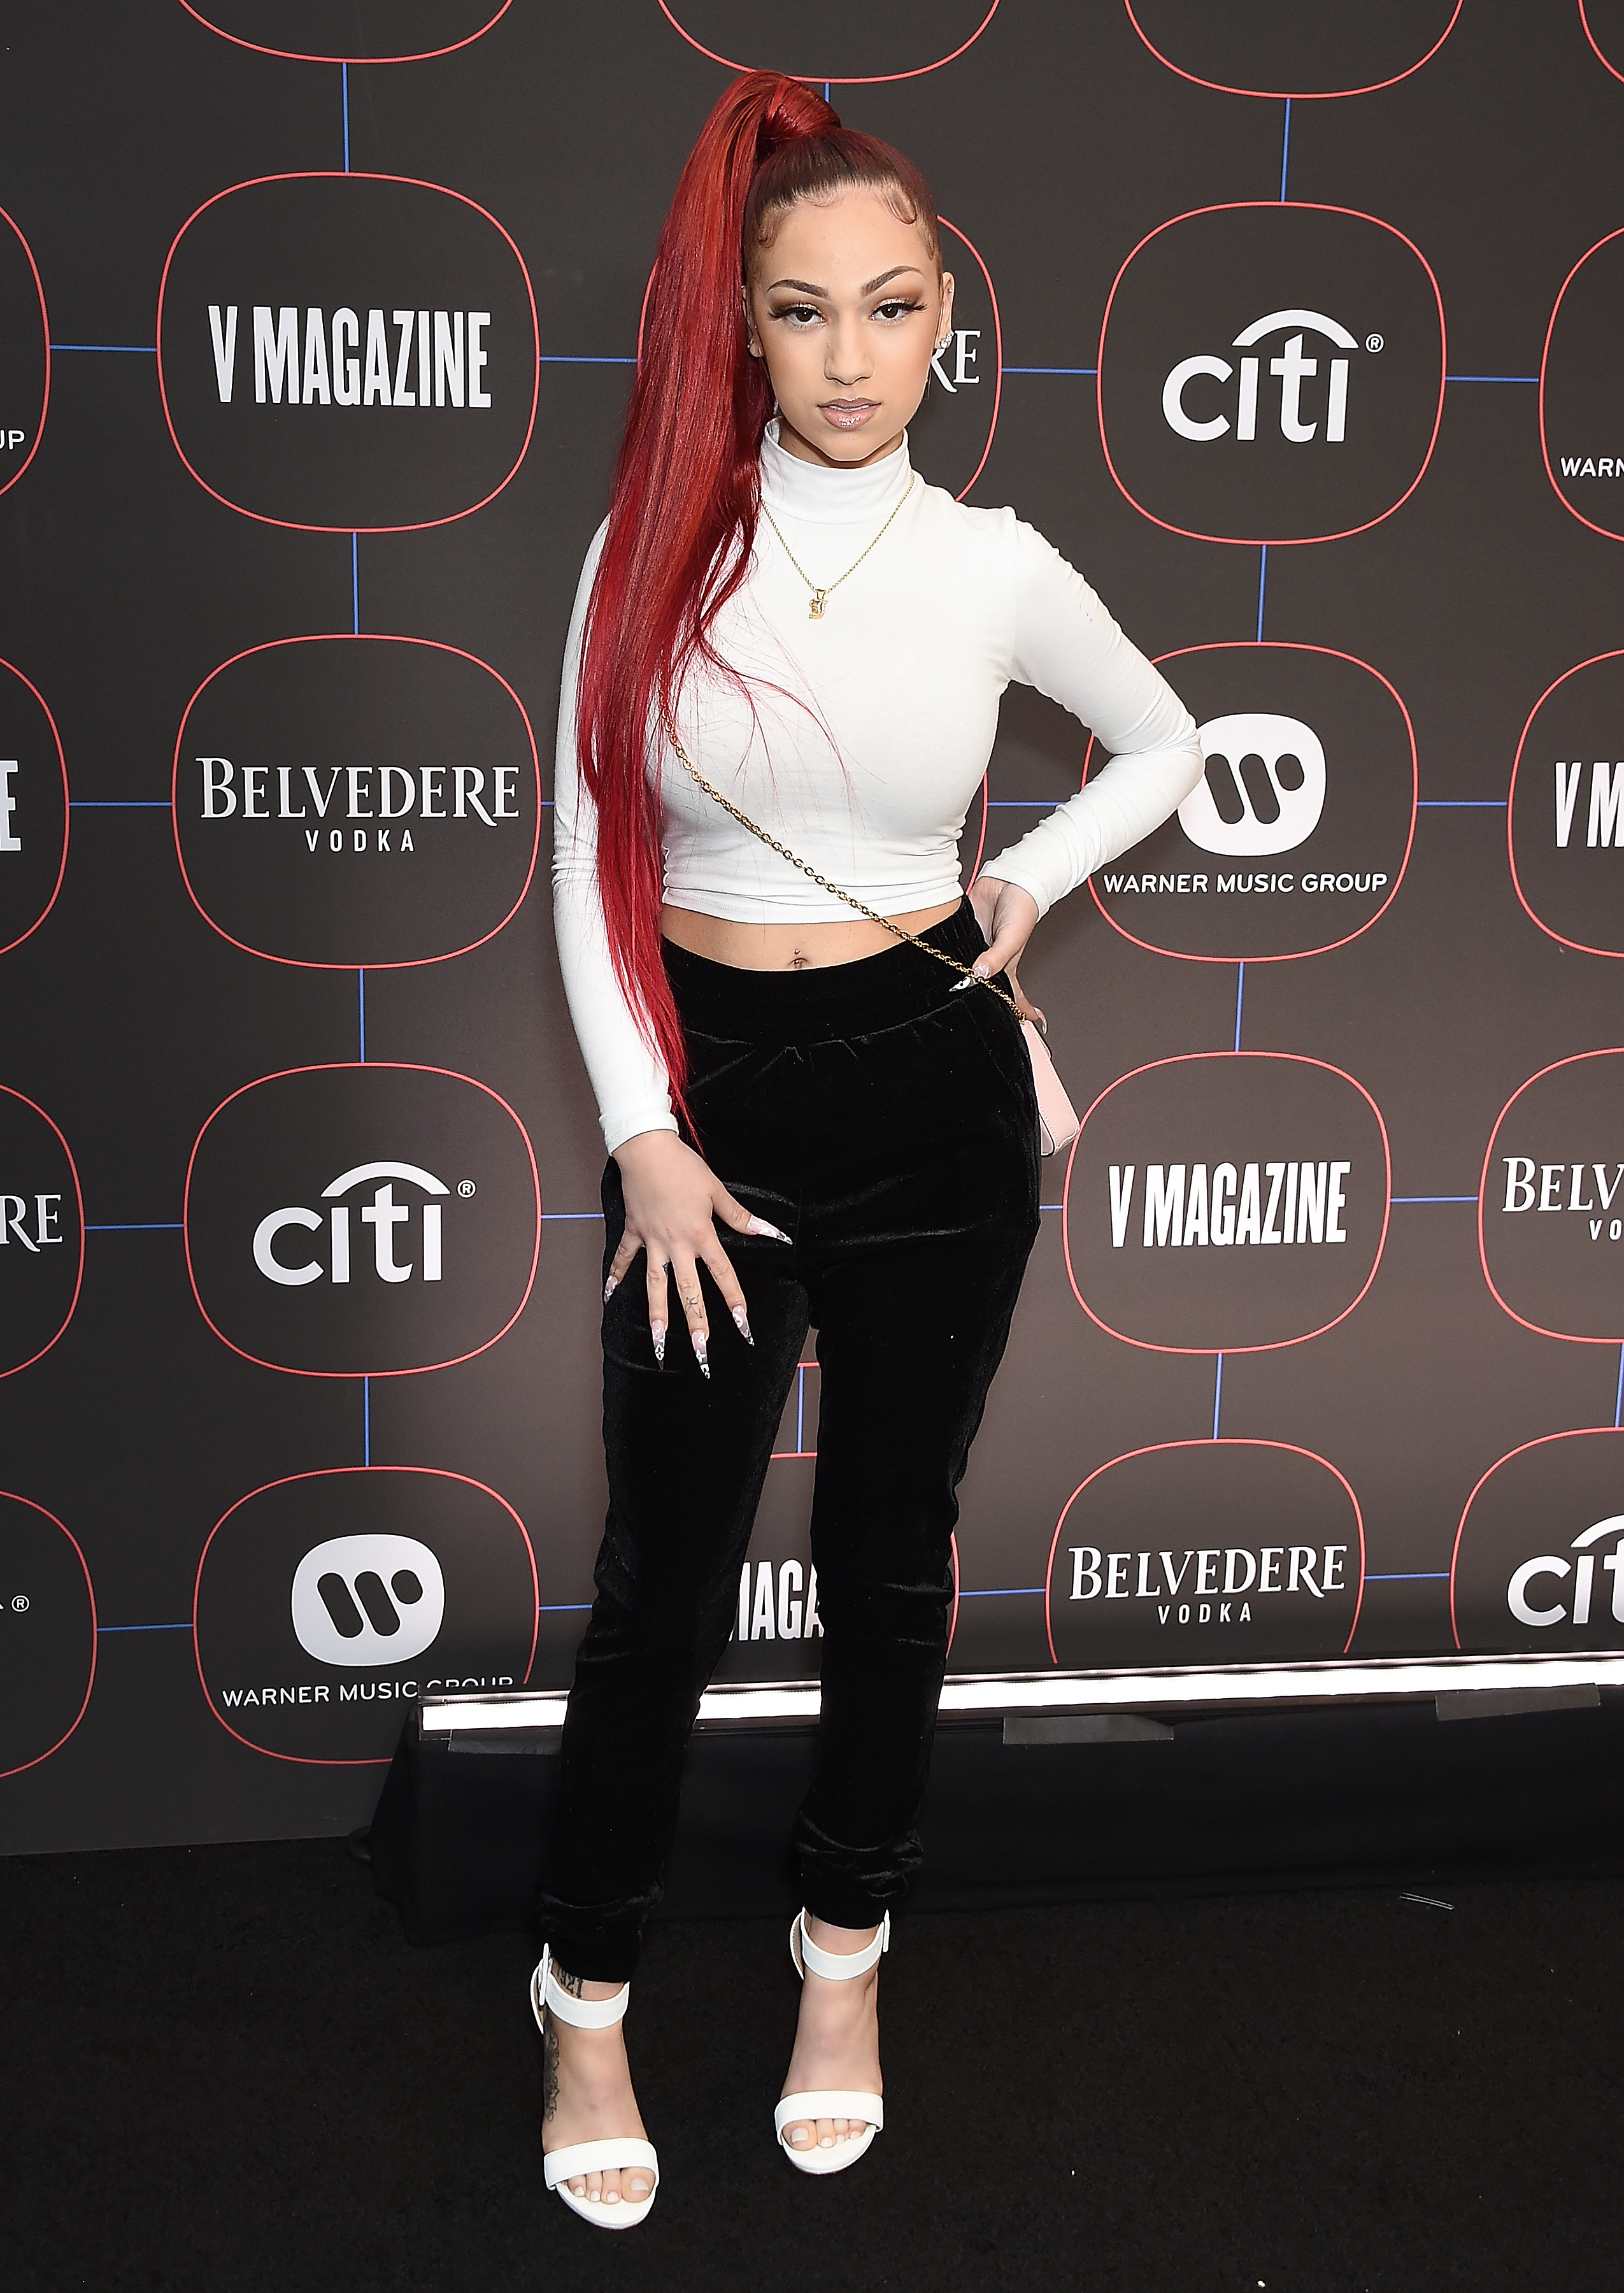 Bhad Bhabie Doesn’t Want A Big Sweet Sixteen Birthday Party